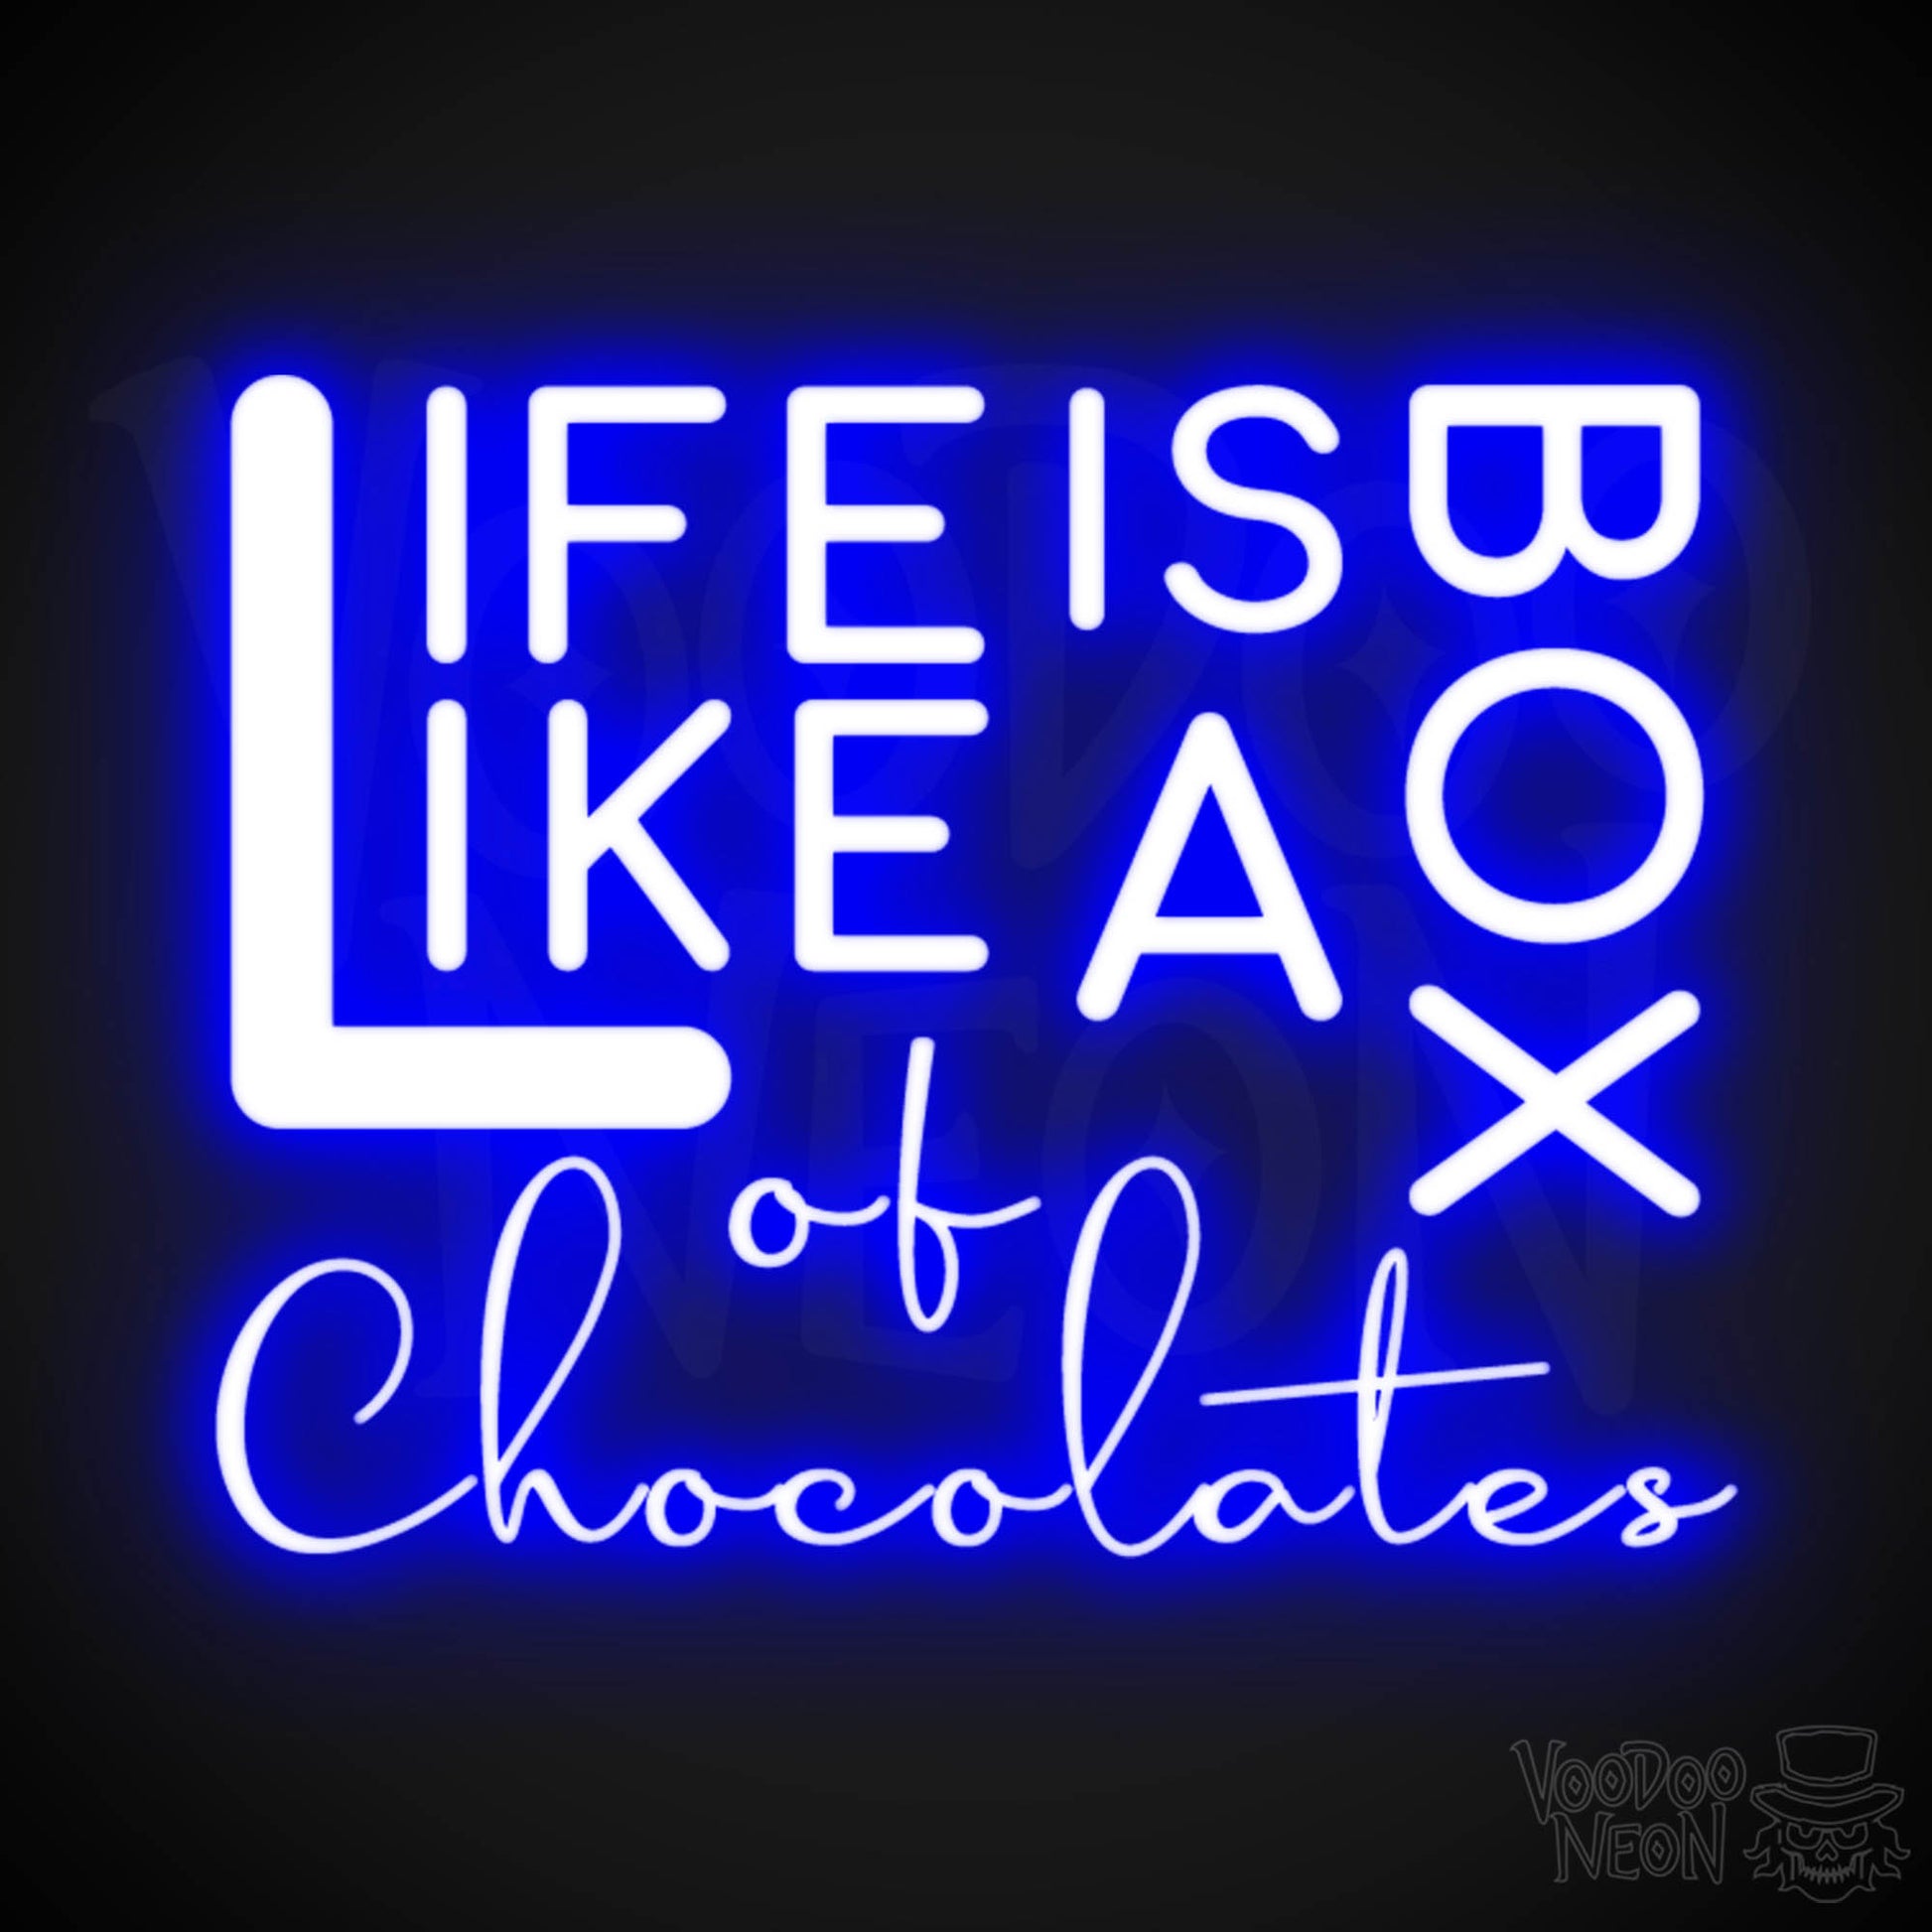 Life Is Like A Box Of Chocolates Neon Sign - Neon Life Is Like A Box Of Chocolates Sign - LED Wall Art - Color Dark Blue